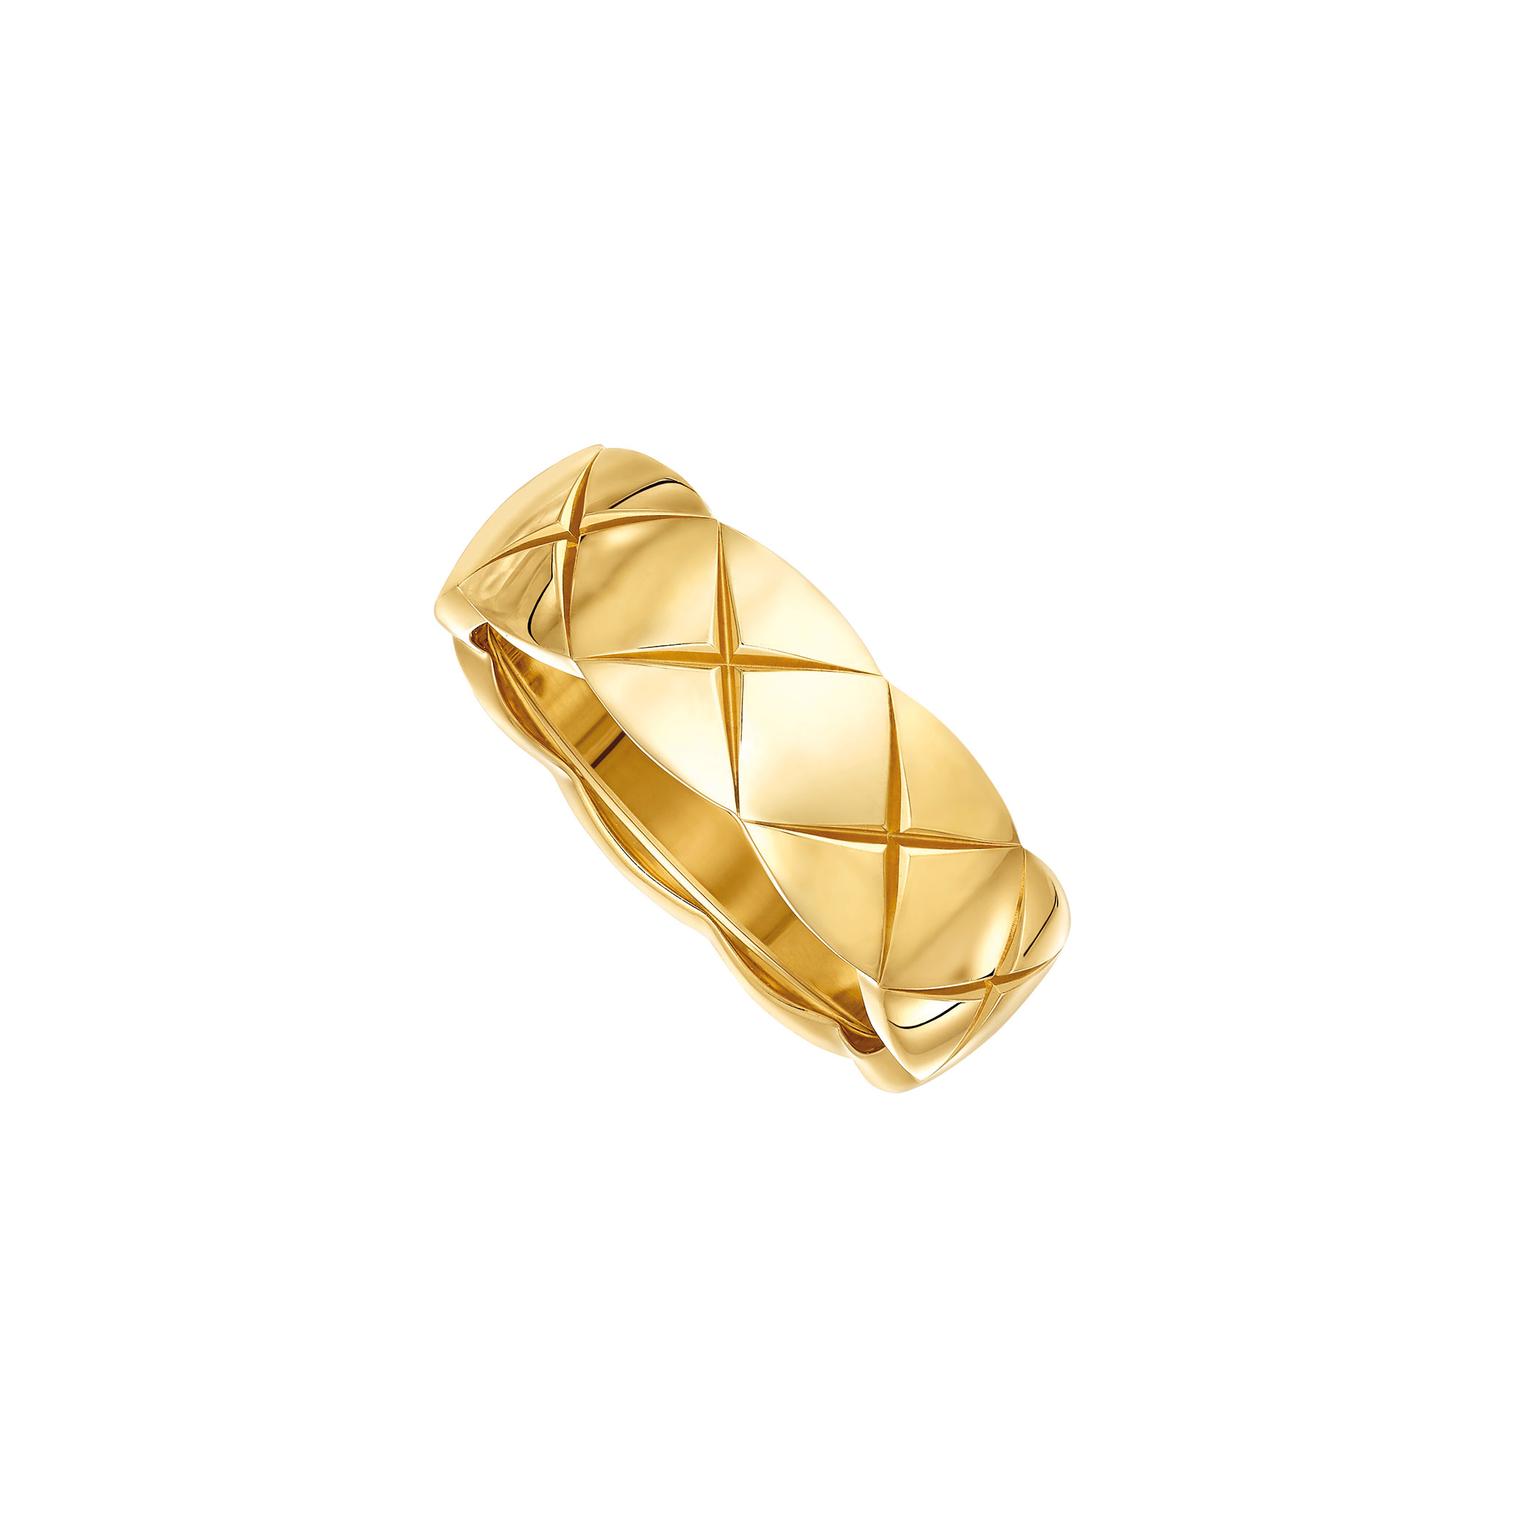 Small Coco Crush gold ring, Net-a-Porter